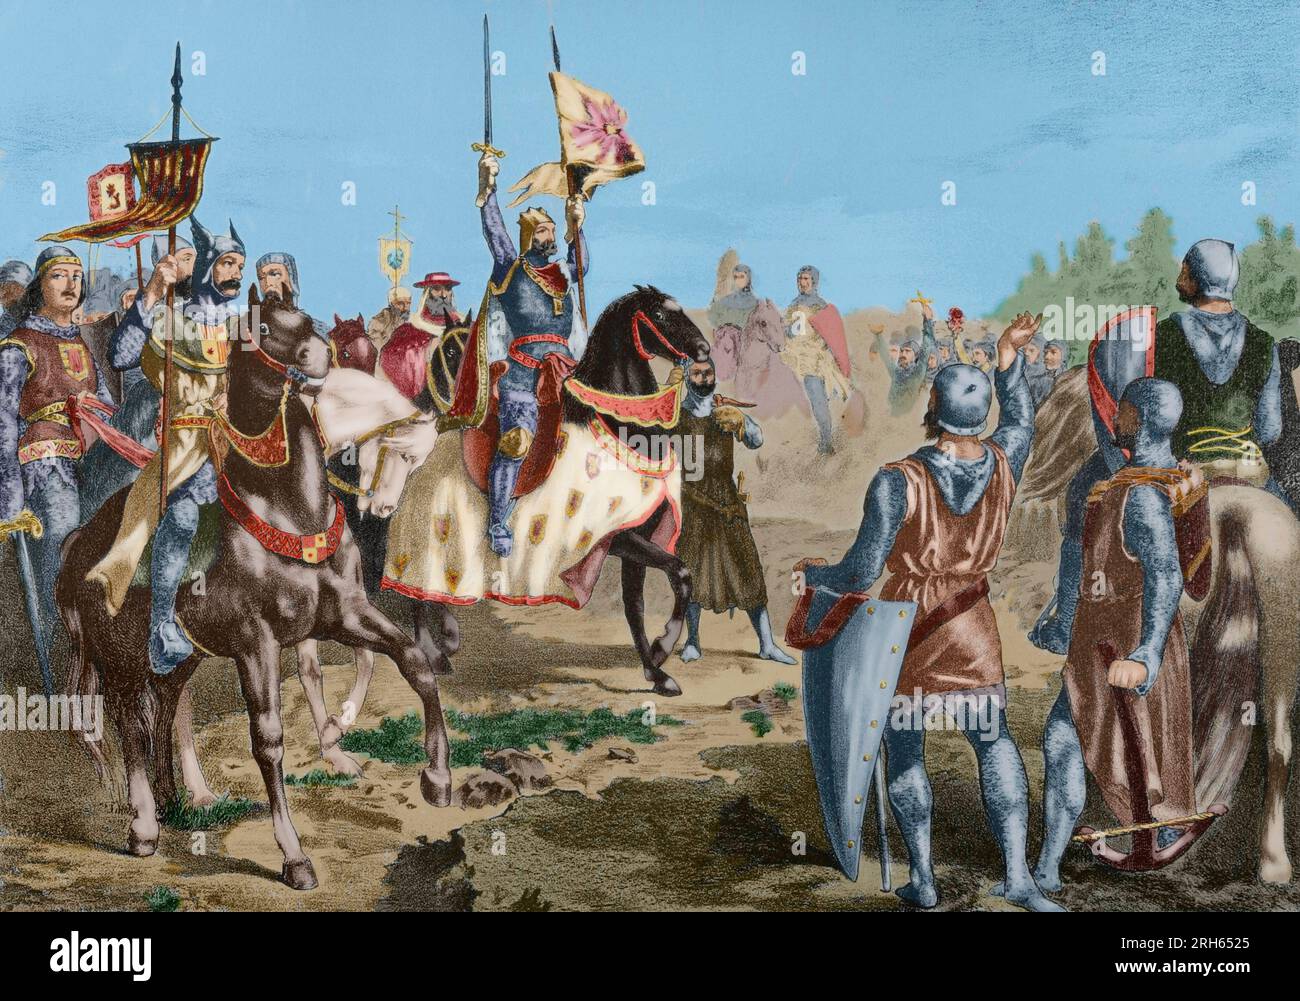 Alfonso VIII, king of Castile (1155-1214), celebrating the victory at the Batte of Las Navas de Tolosa, 1212, against the Almohad Muslim. Spain. Lithography. Museo Militar, 1883. Later colouration. Stock Photo